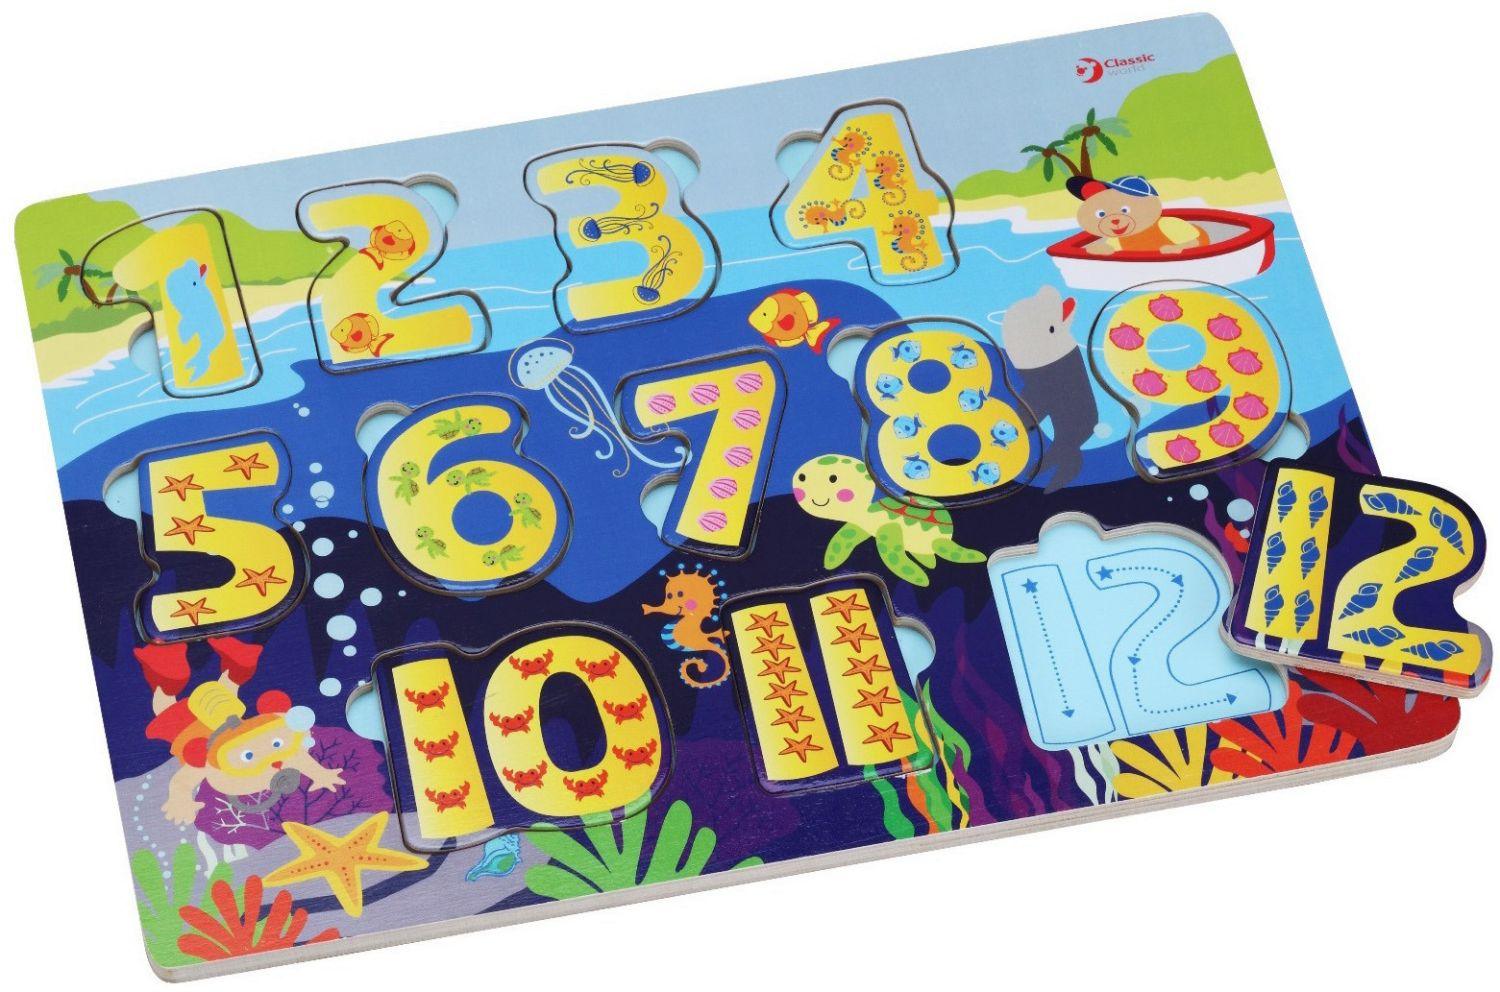 Wooden puzzle for children with numbers - MoonyBoon